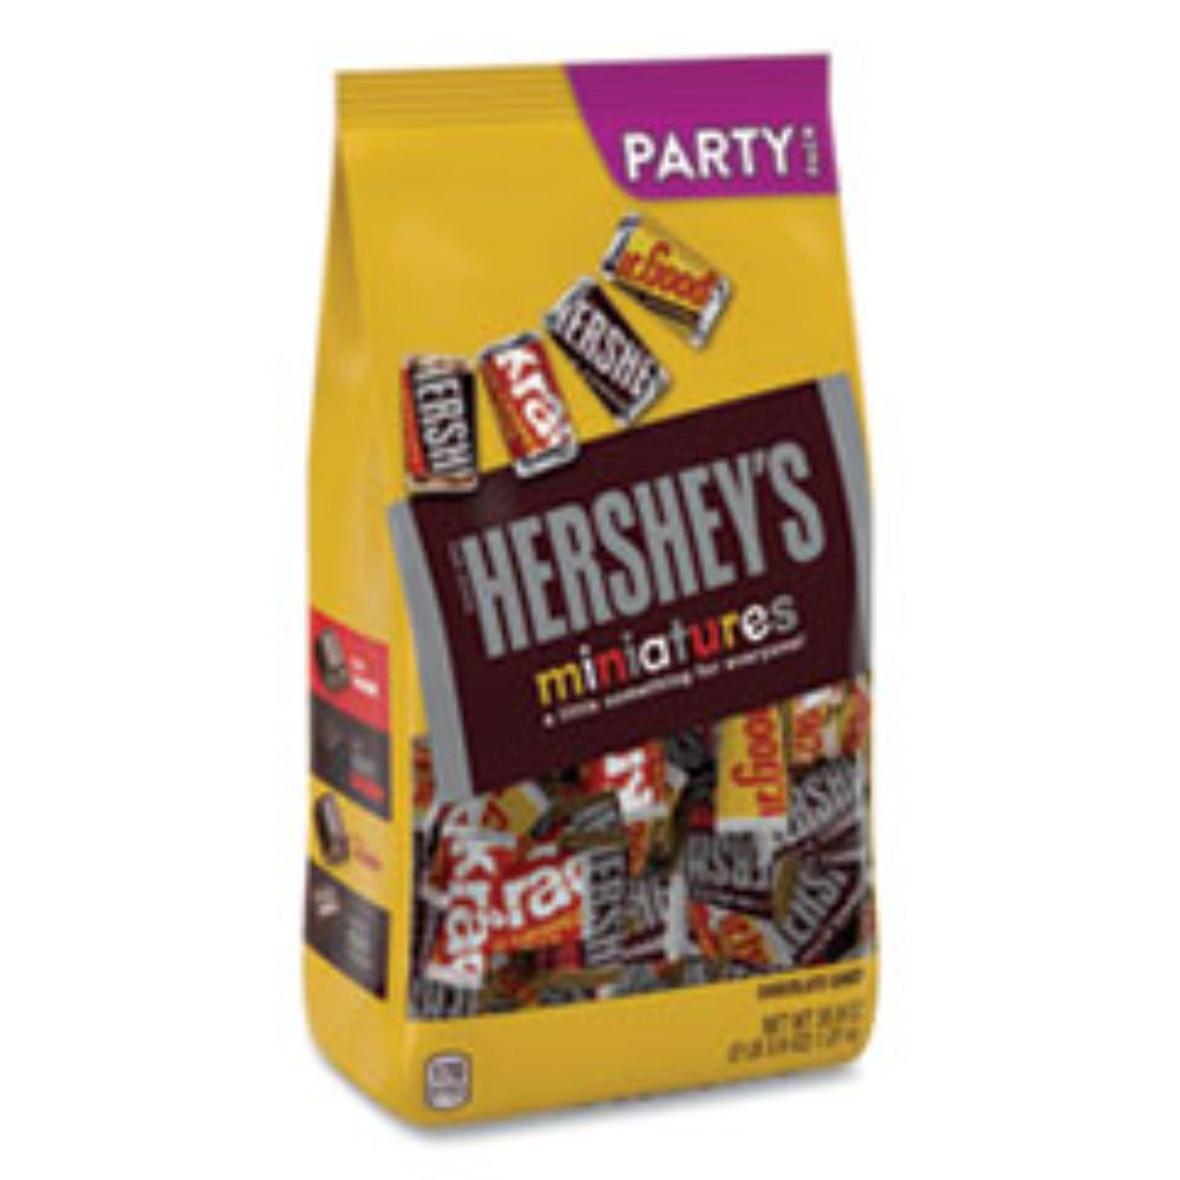 Hershey's Chocolate Miniatures Party Pack Assortment